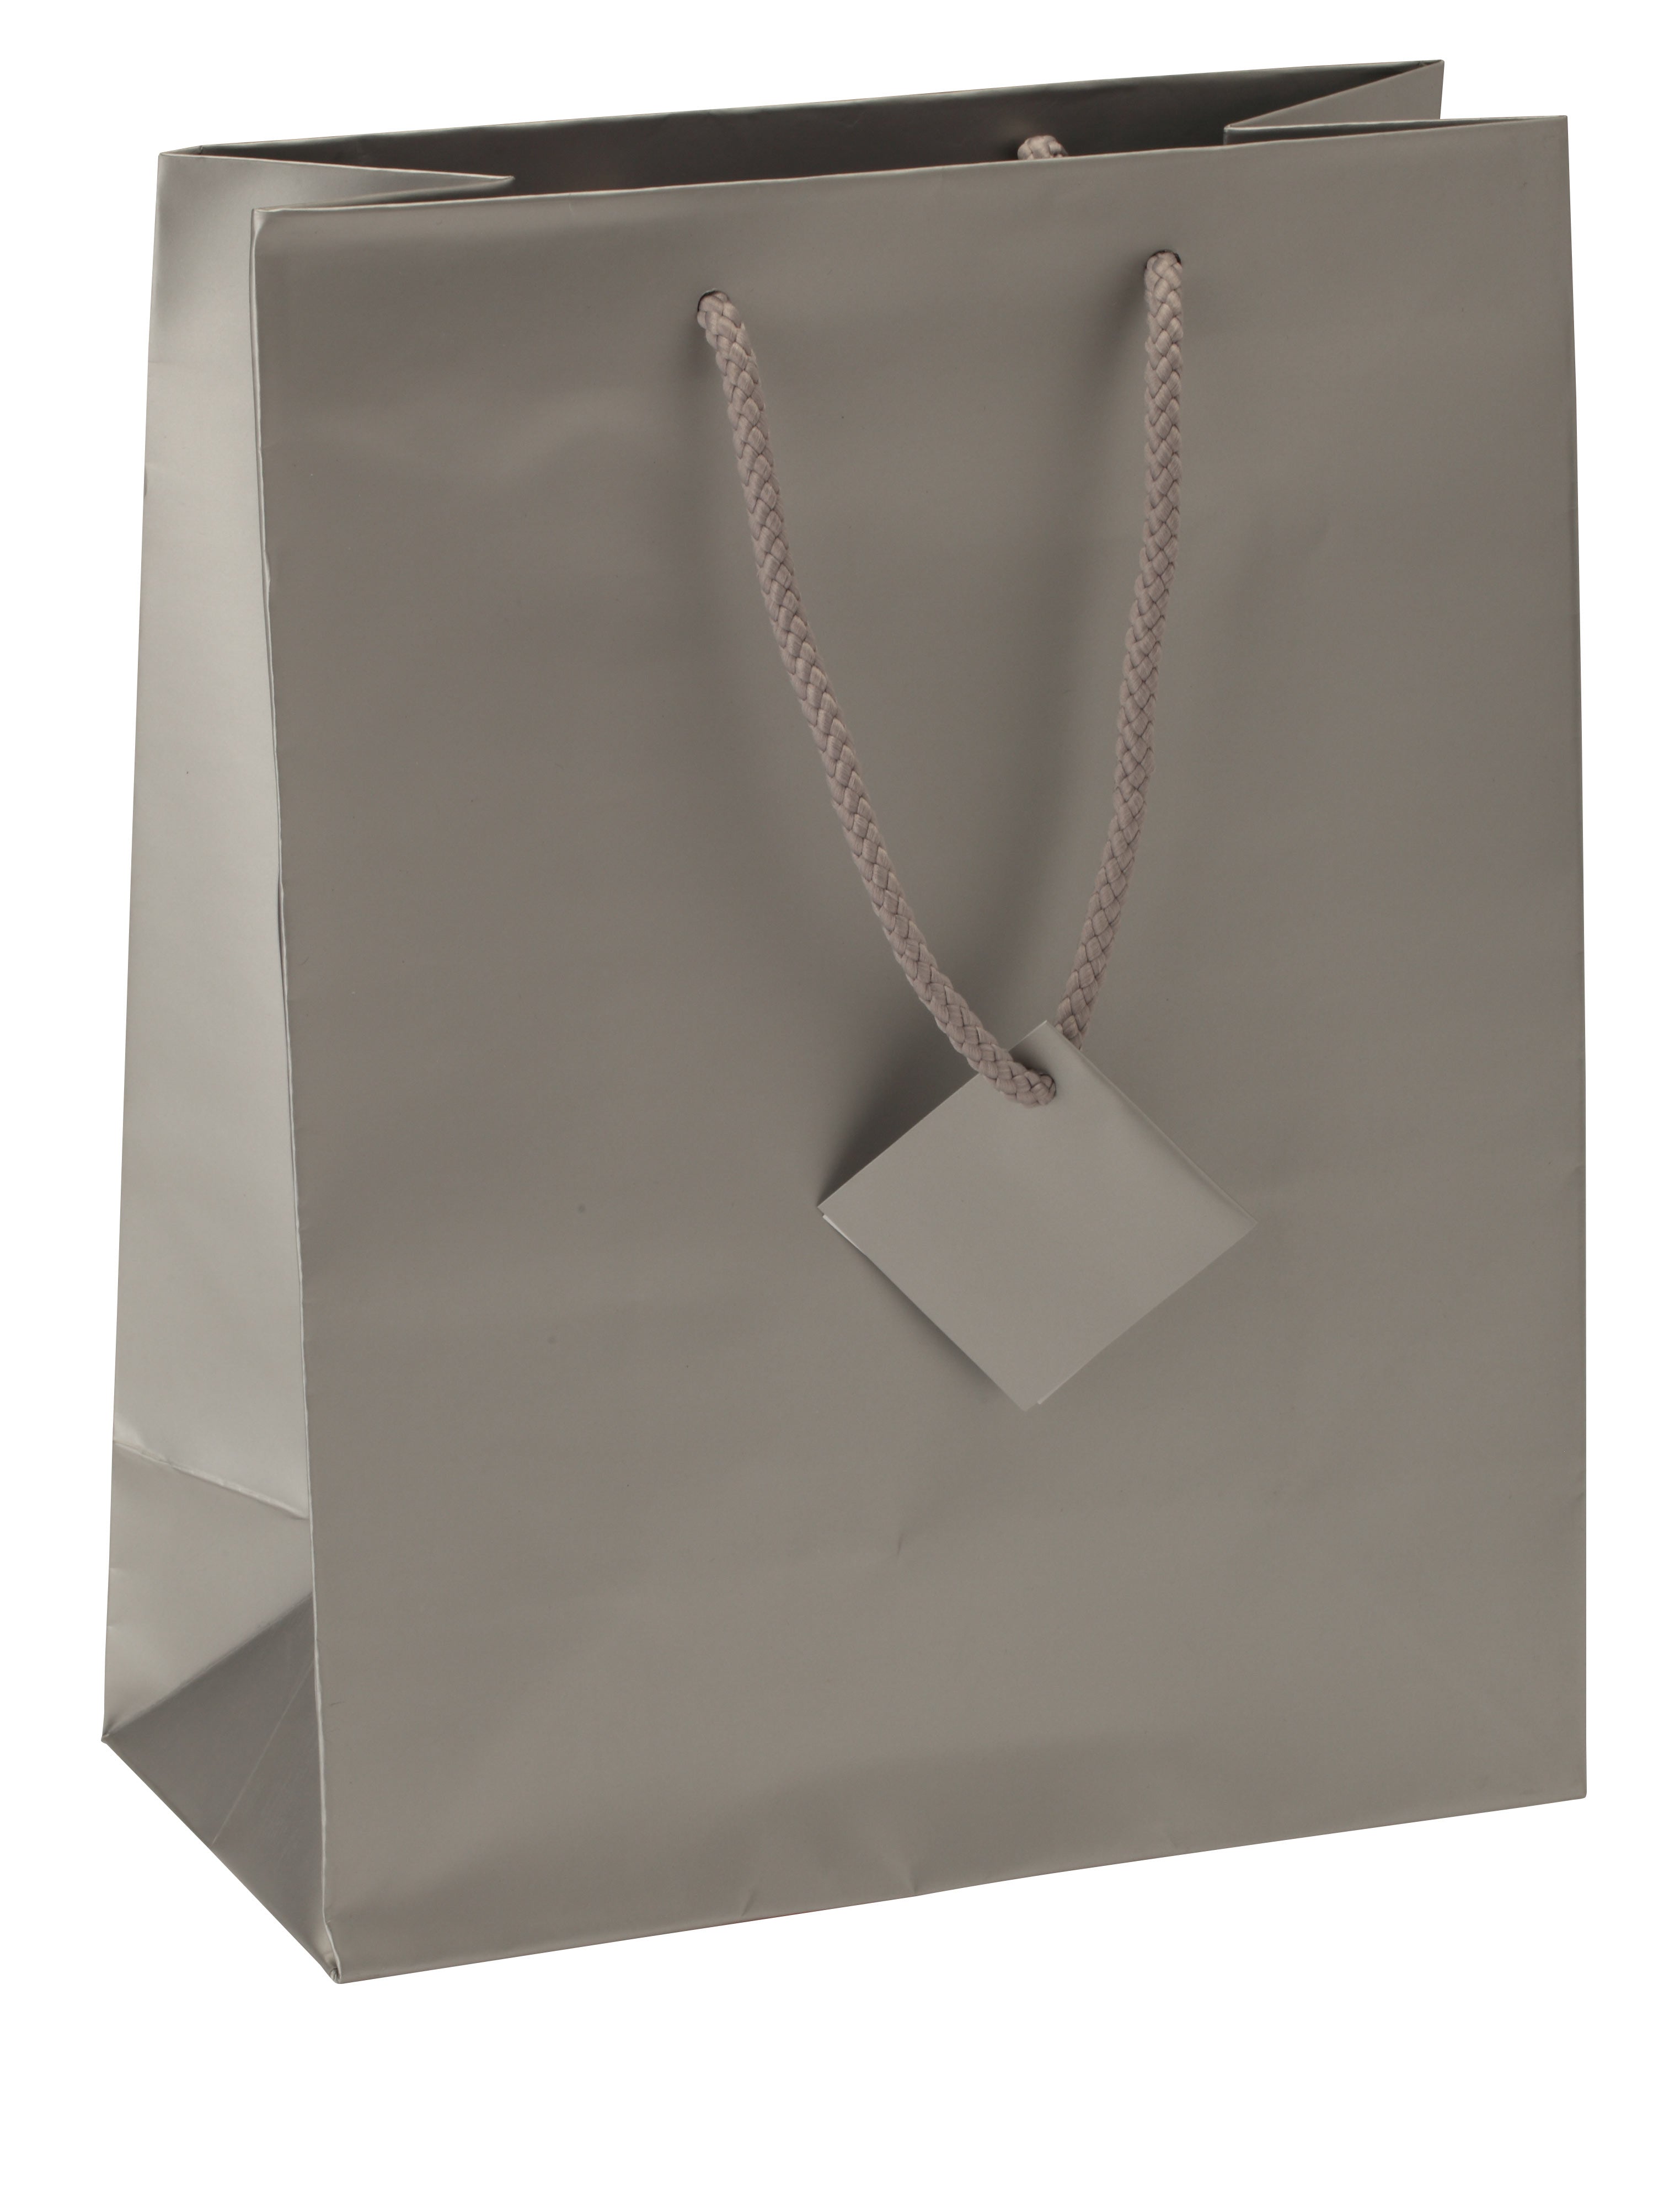 Satin-Finish Tote-Style Gift Bags in Silver Frost